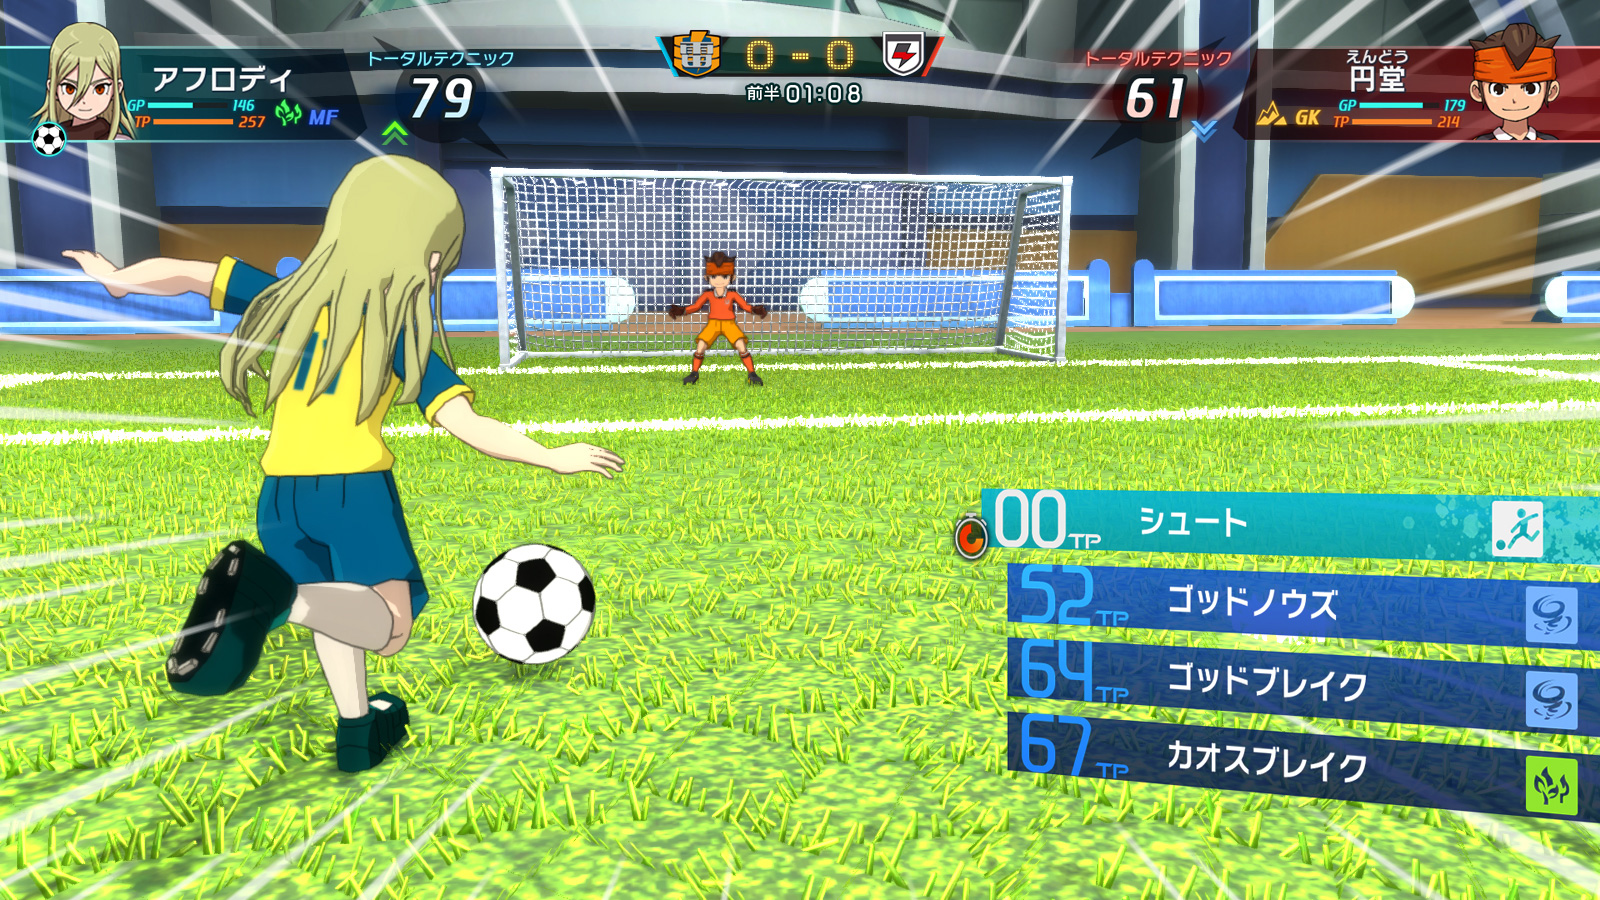 Inazuma Eleven : Victory Road of Heroes level 5